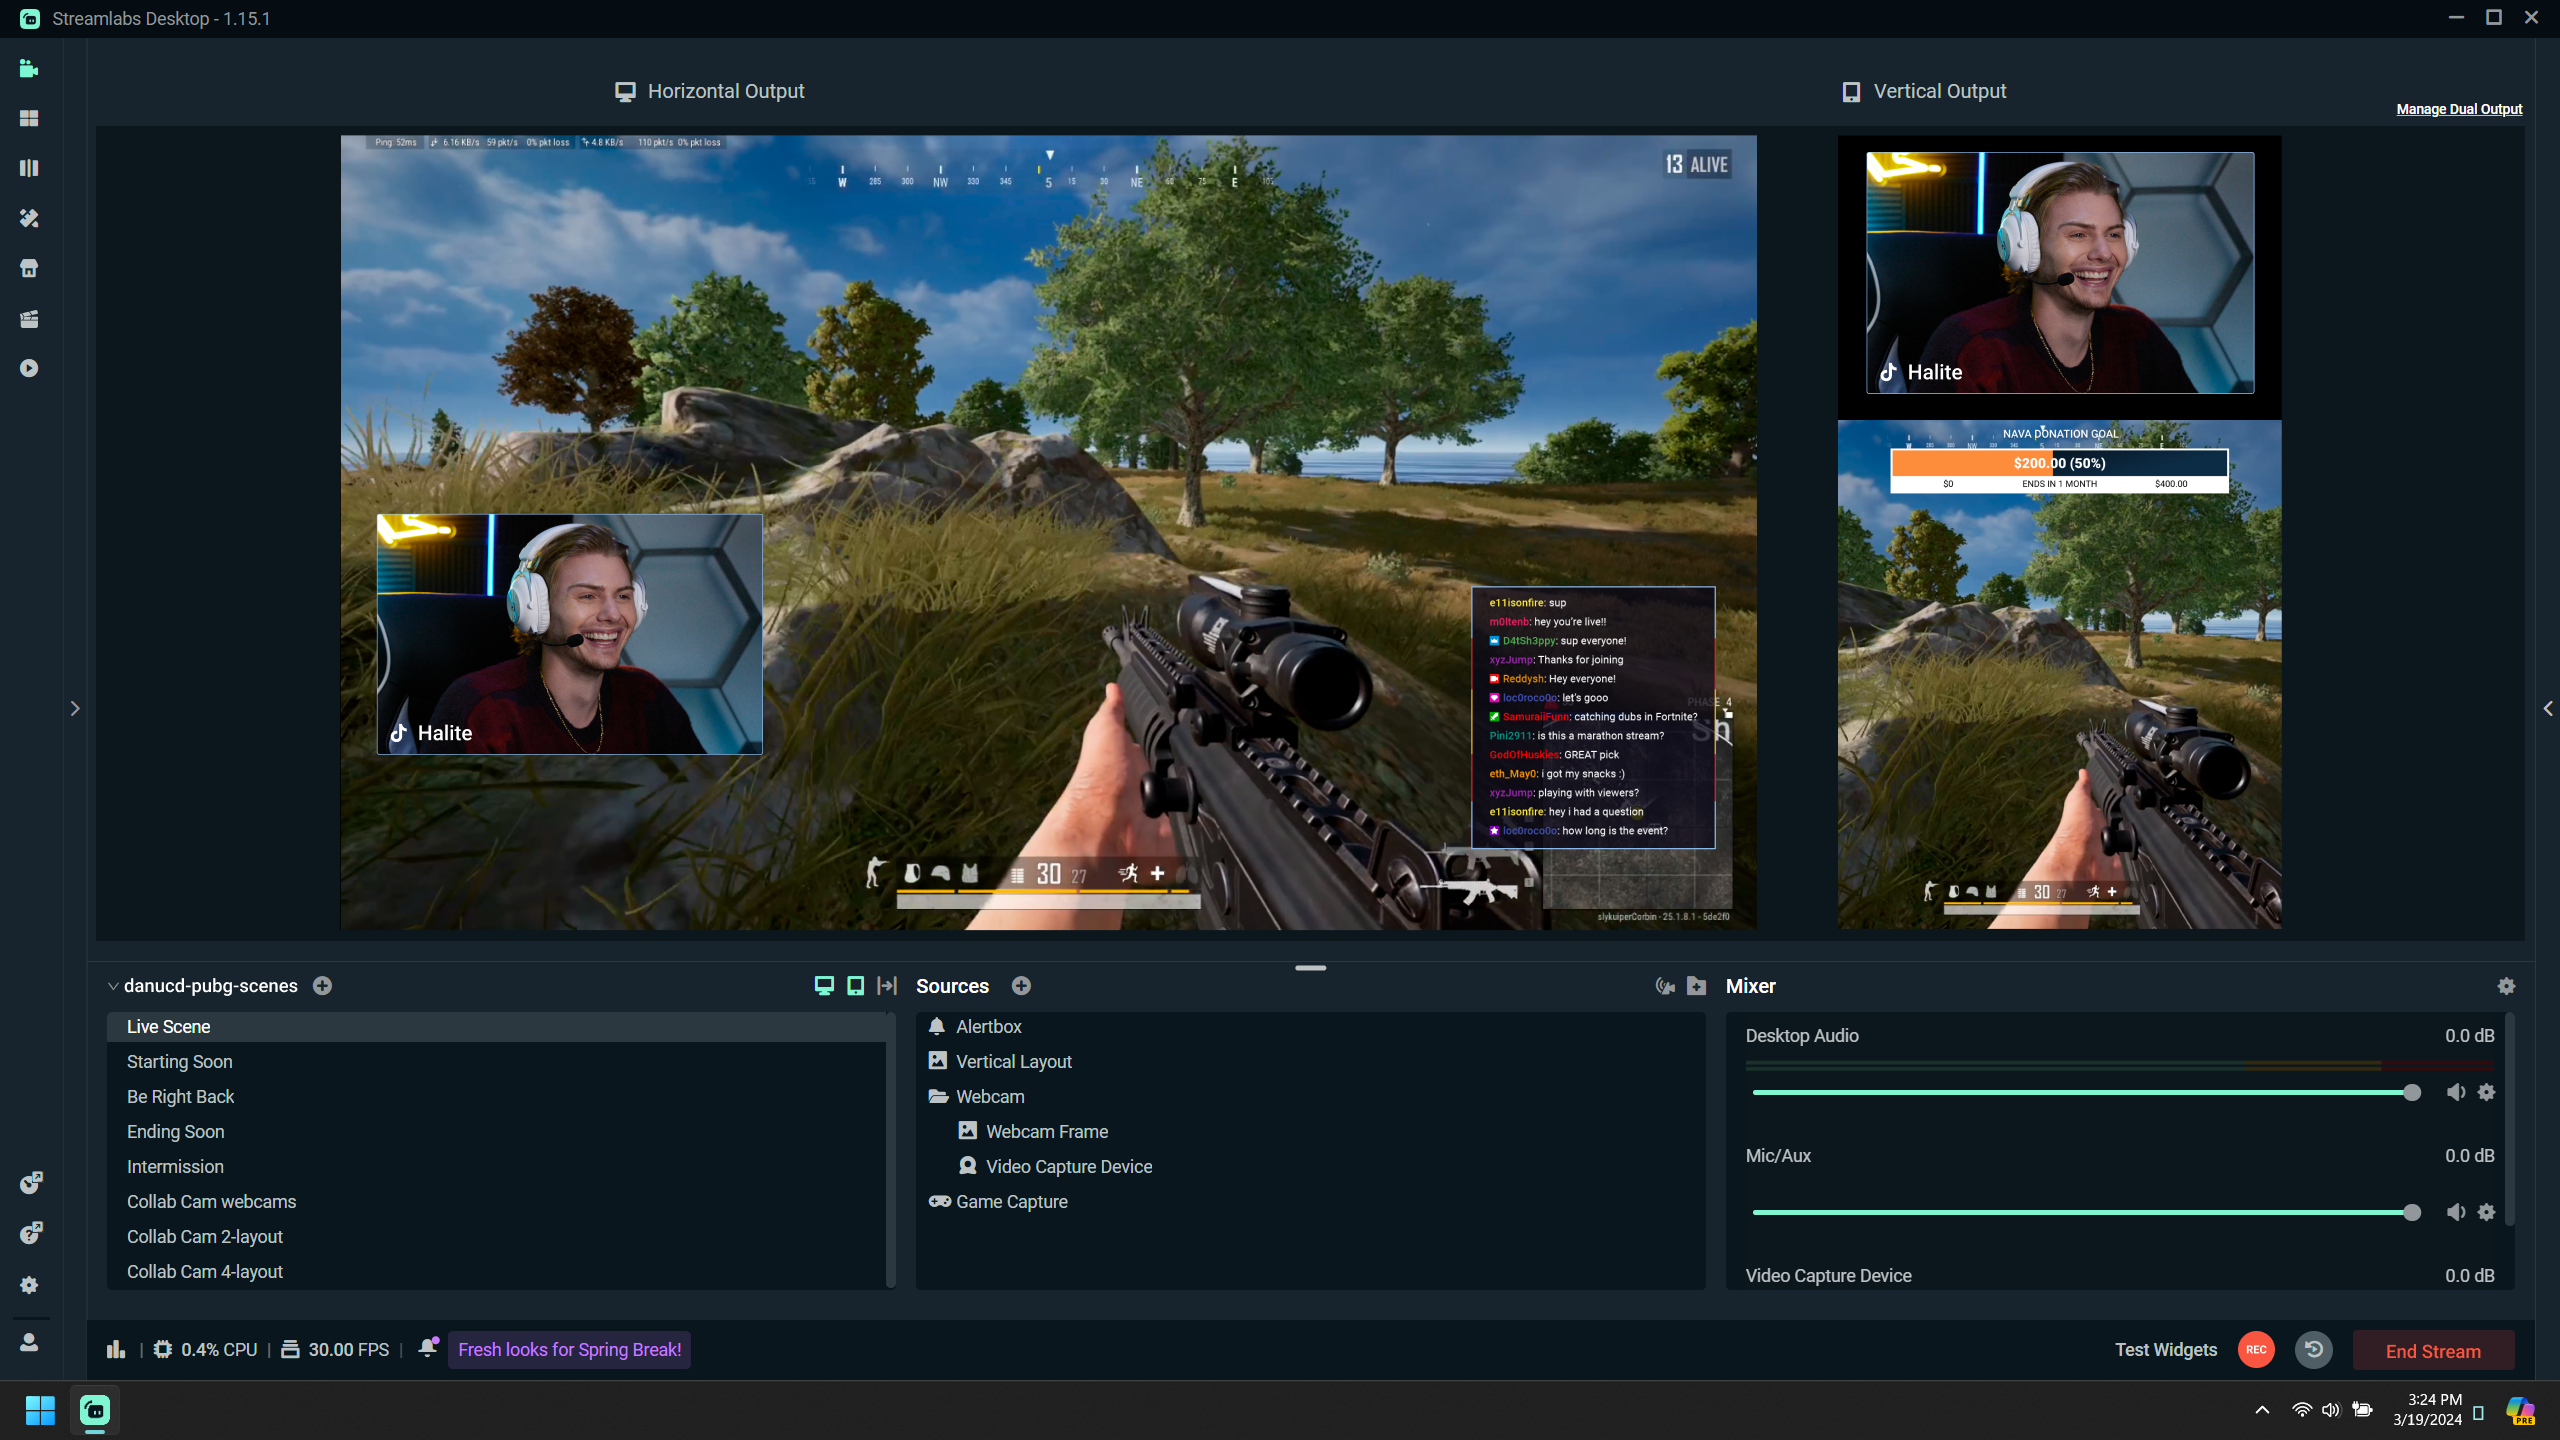 Image of Streamlabs Desktop user interface while streaming